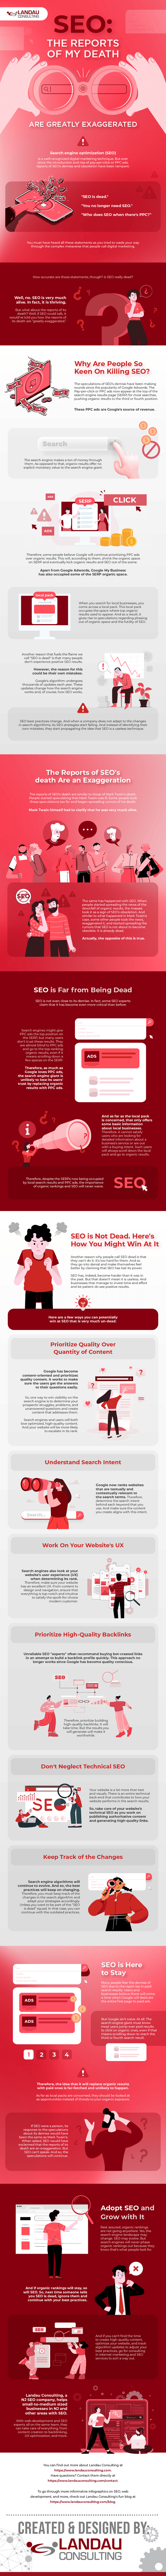 SEO-The-Reports-of-My-Death-Are-Greatly-Exaggerated-infographic-image